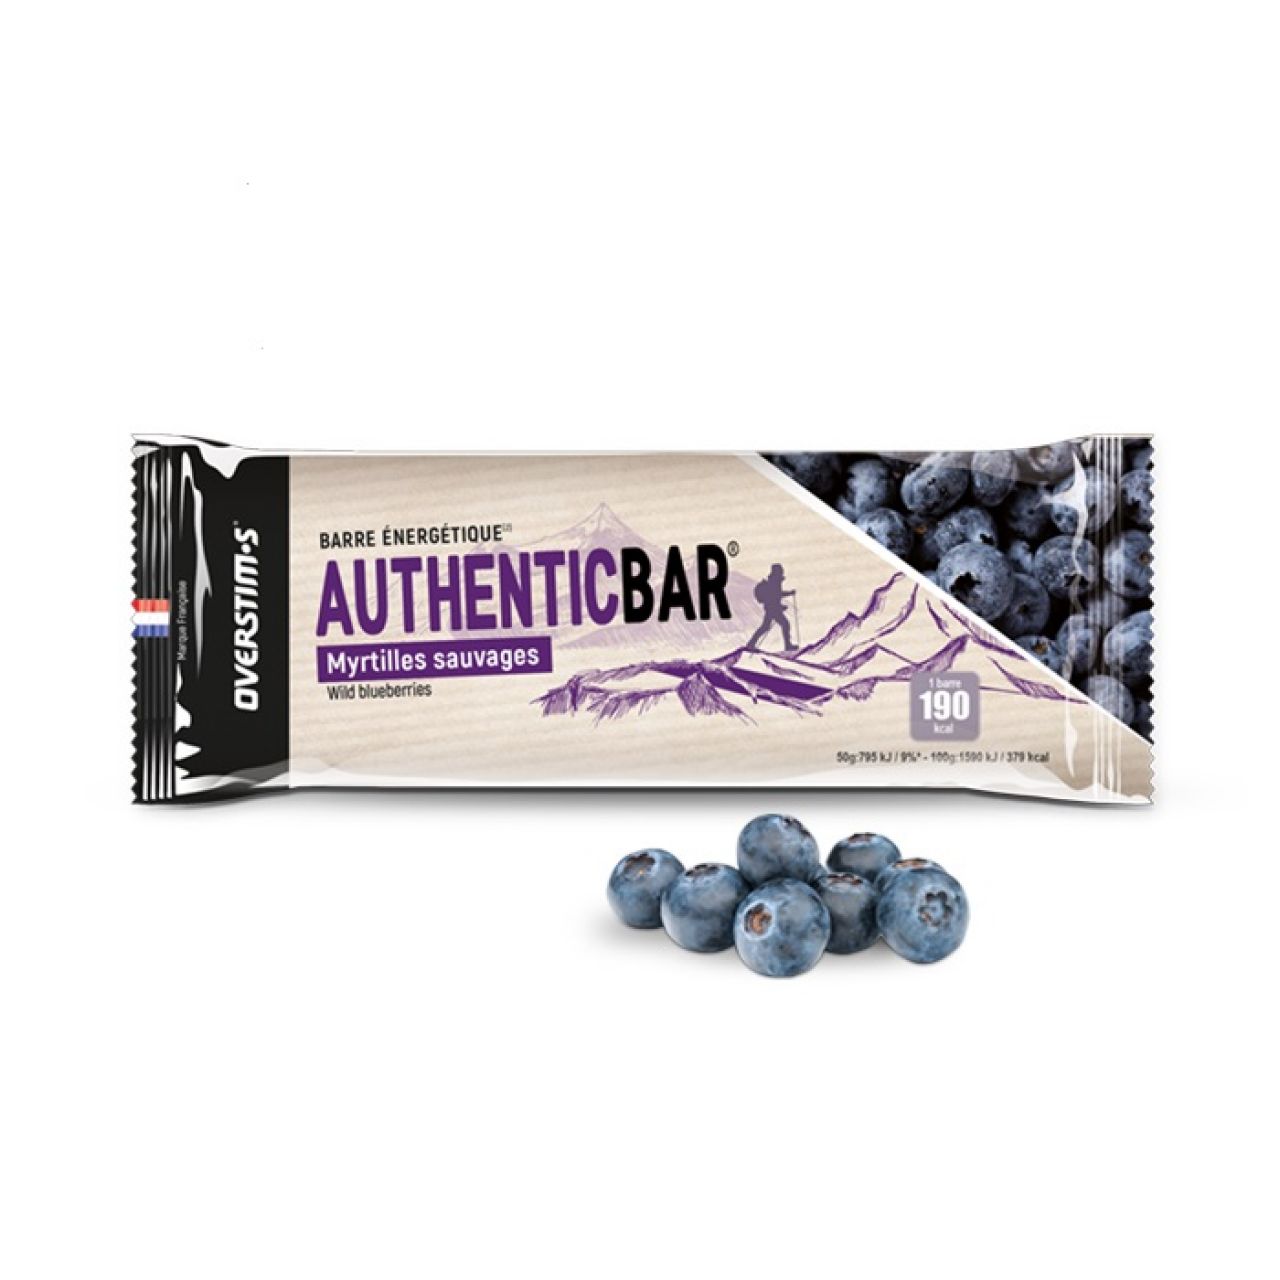 OVERSTIMS AUTHENTIC BAR MYRTILLE SAUVAGES Barres energetiques